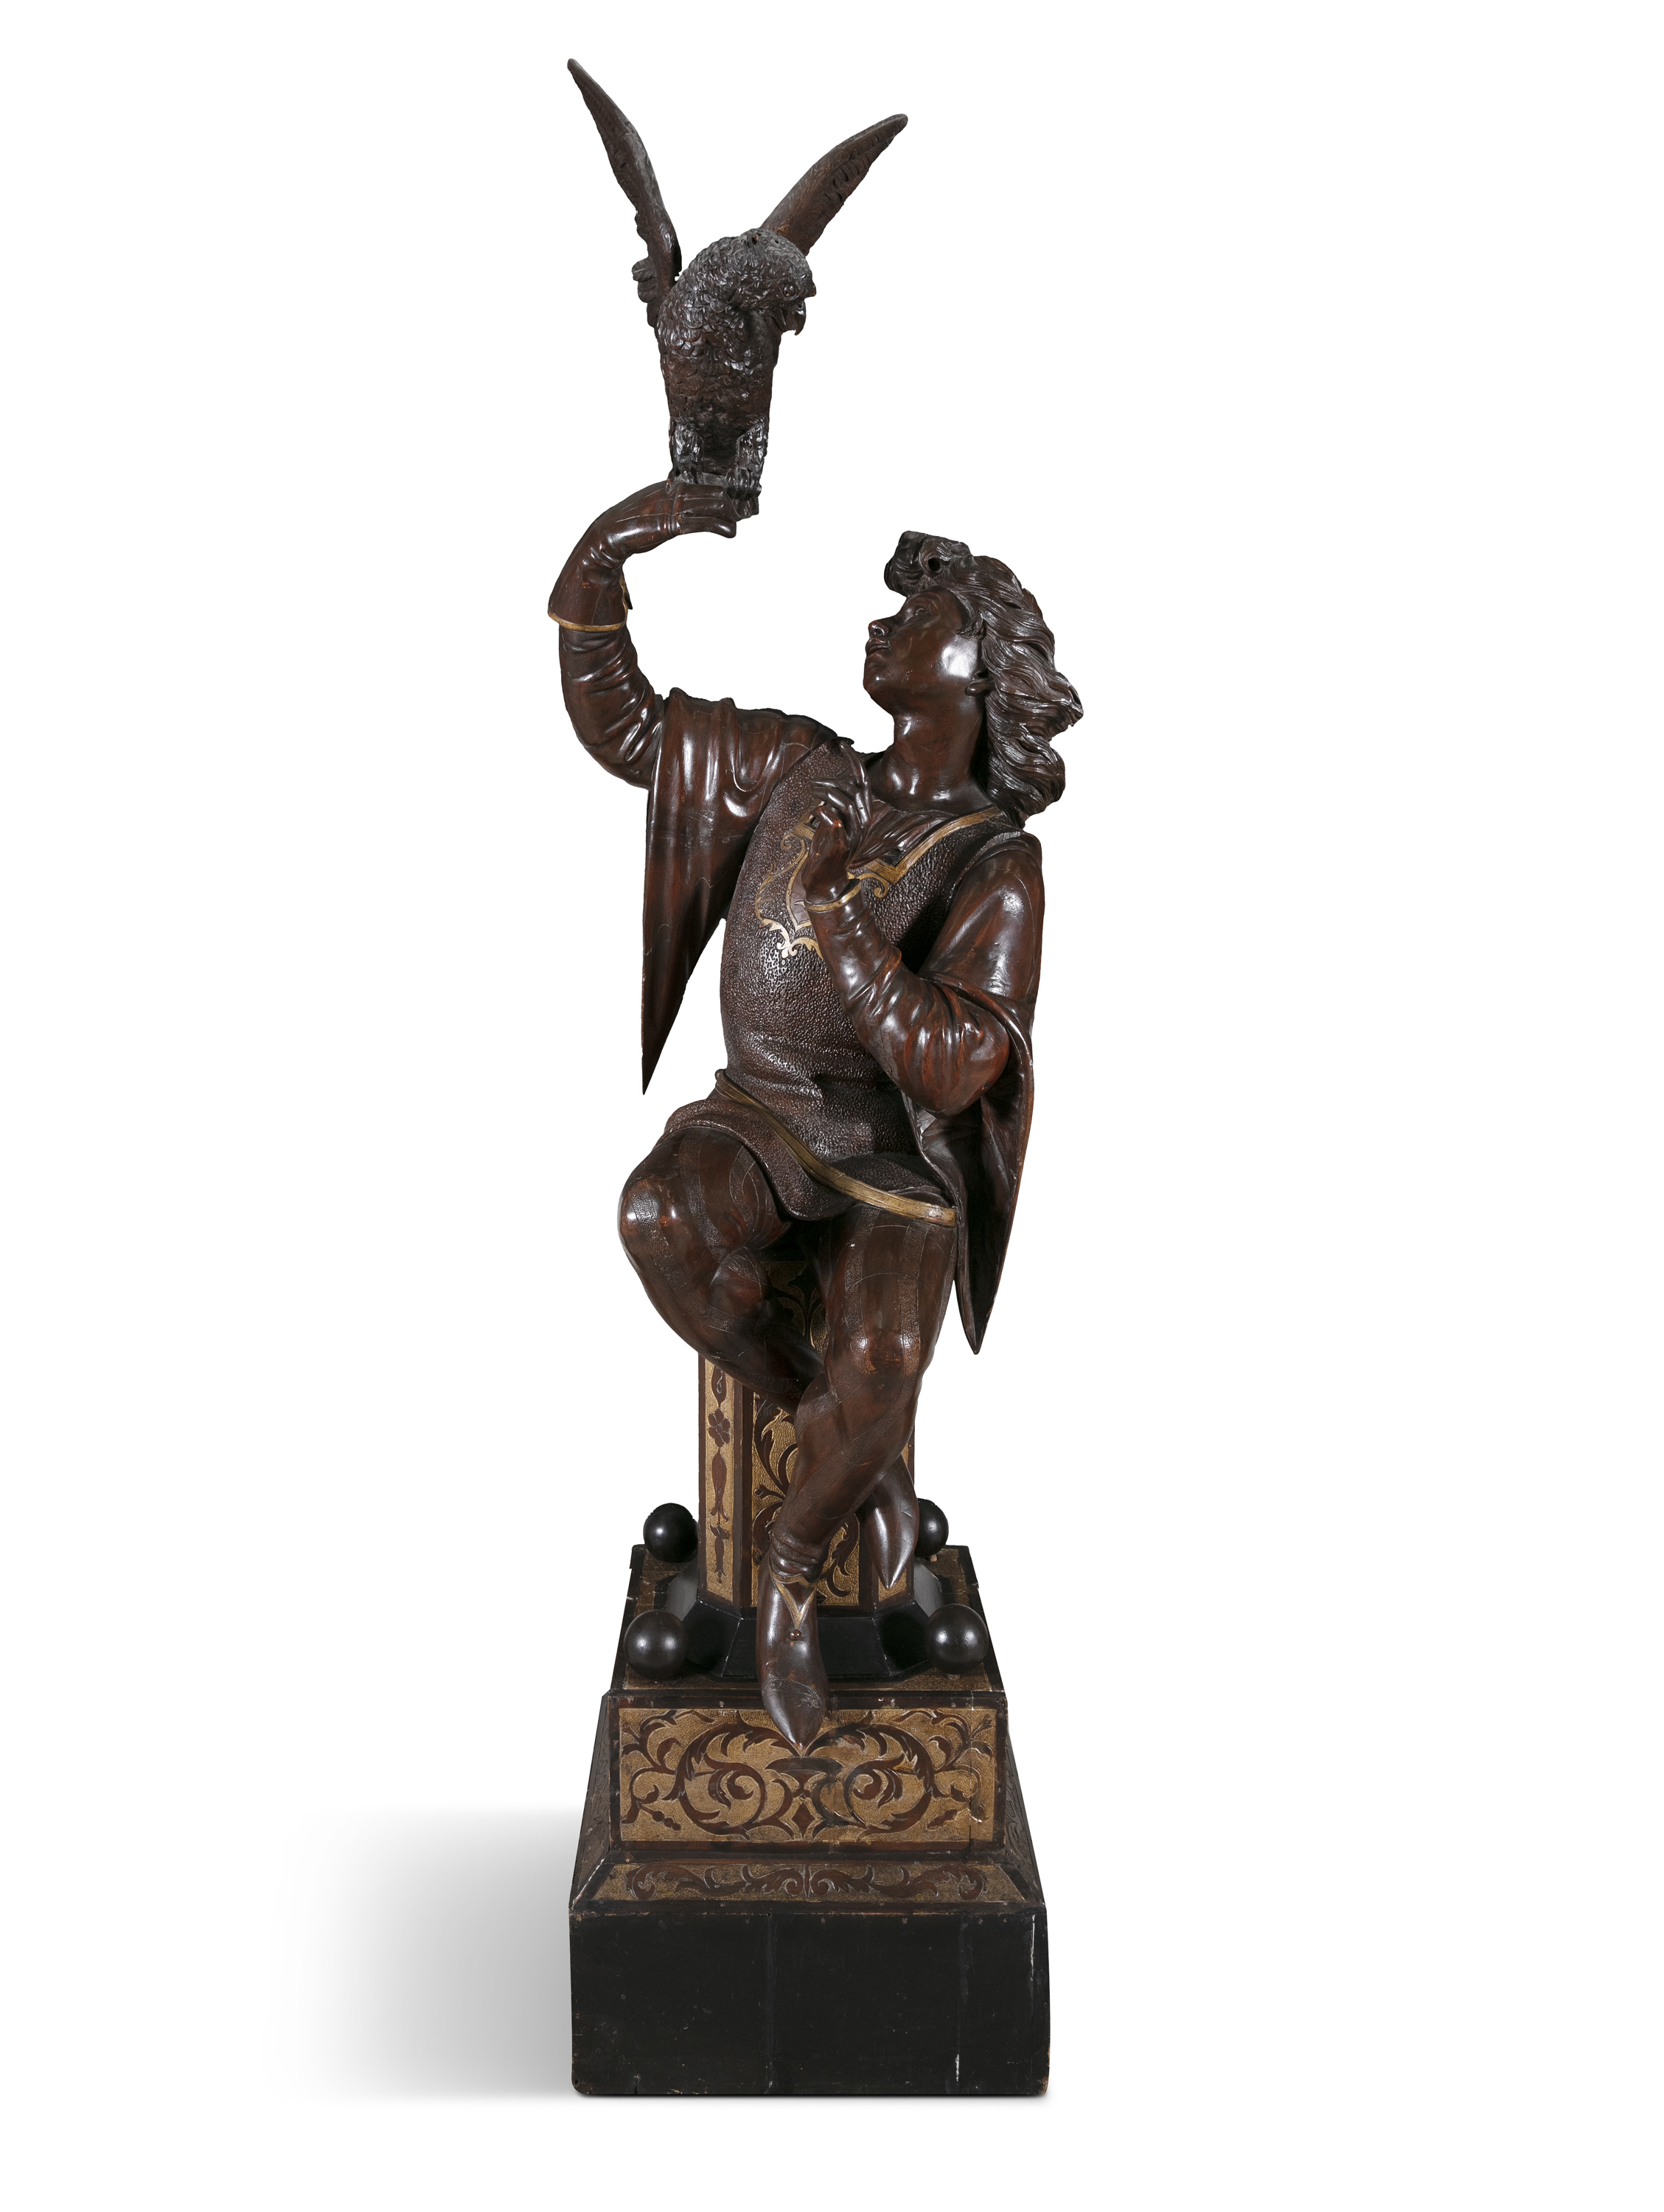 A LARGE FLORENTINE CARVED WALNUT AND PARCEL GILT FIGURE OF A FALCONER, 19th century, in seated